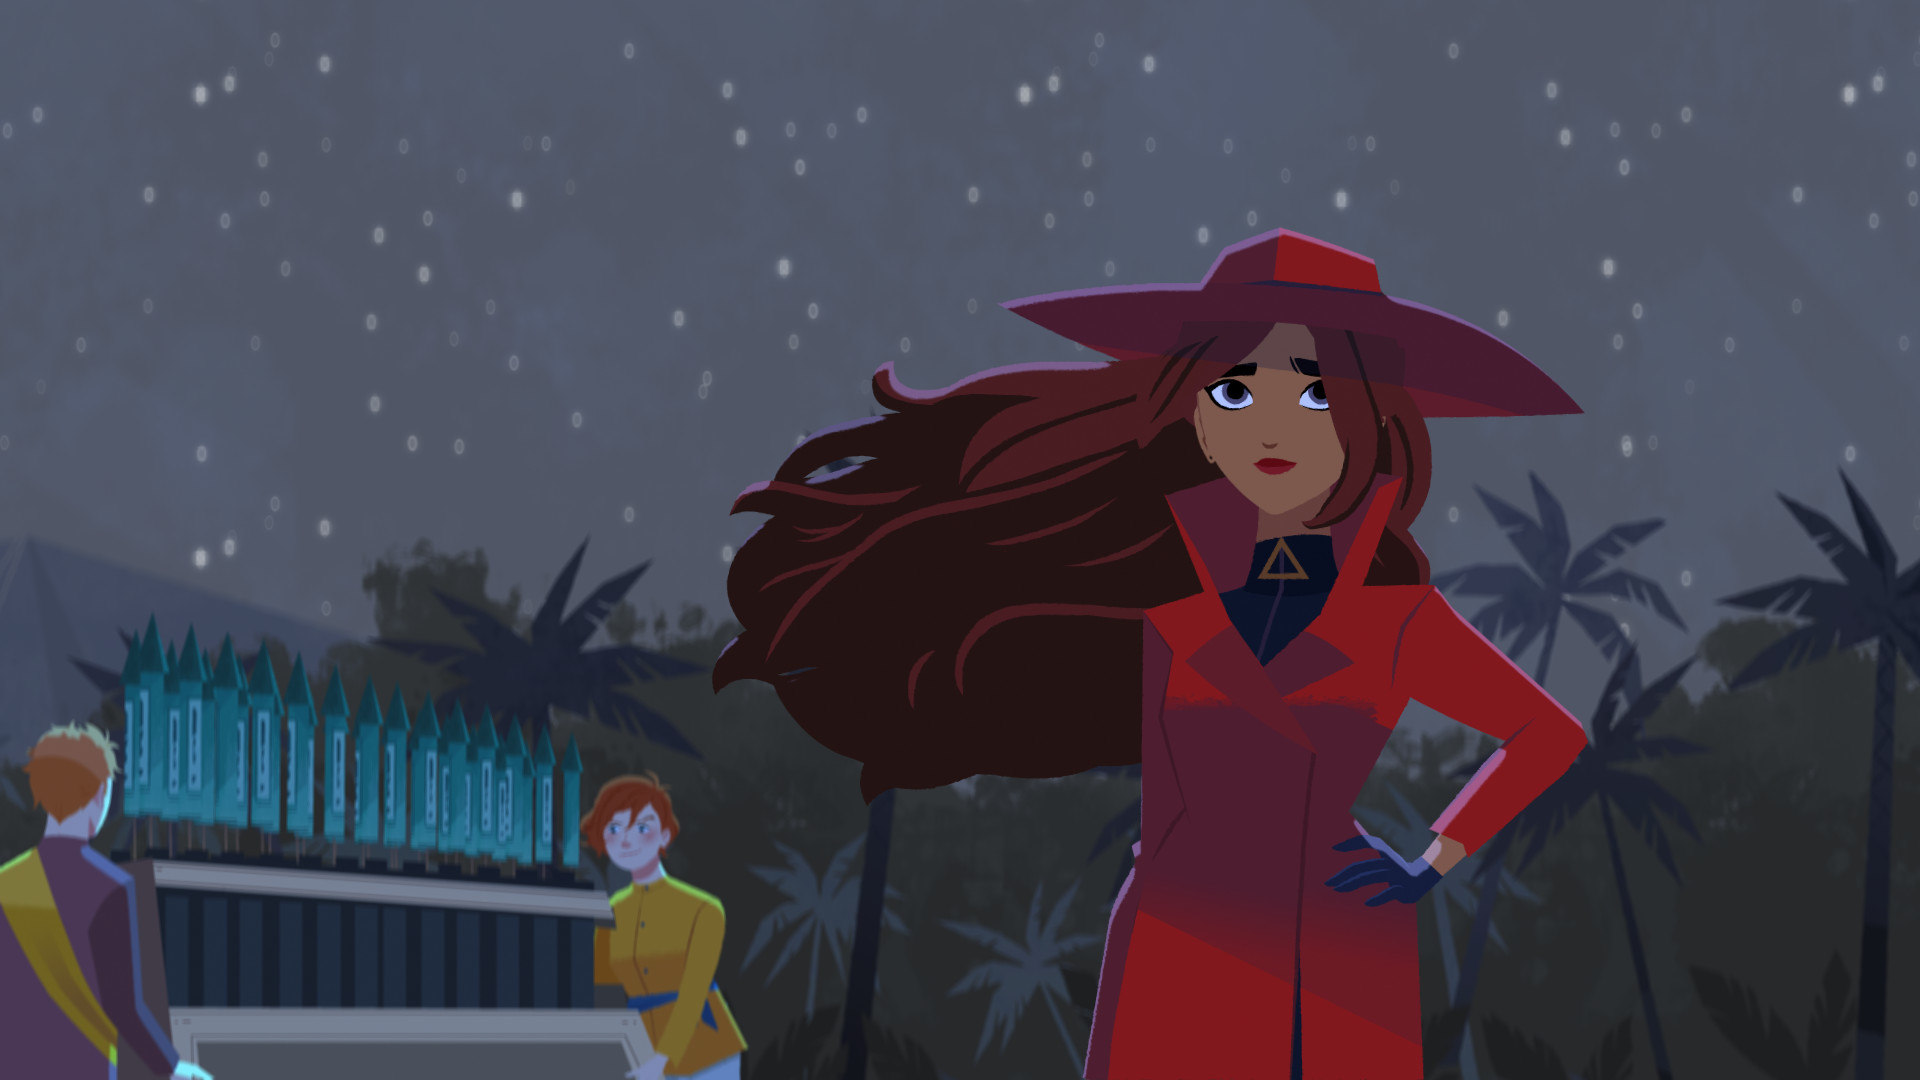 FIRST LOOK: Netflix Sets 'Carmen Sandiego' Reboot for January 18 |  Animation World Network